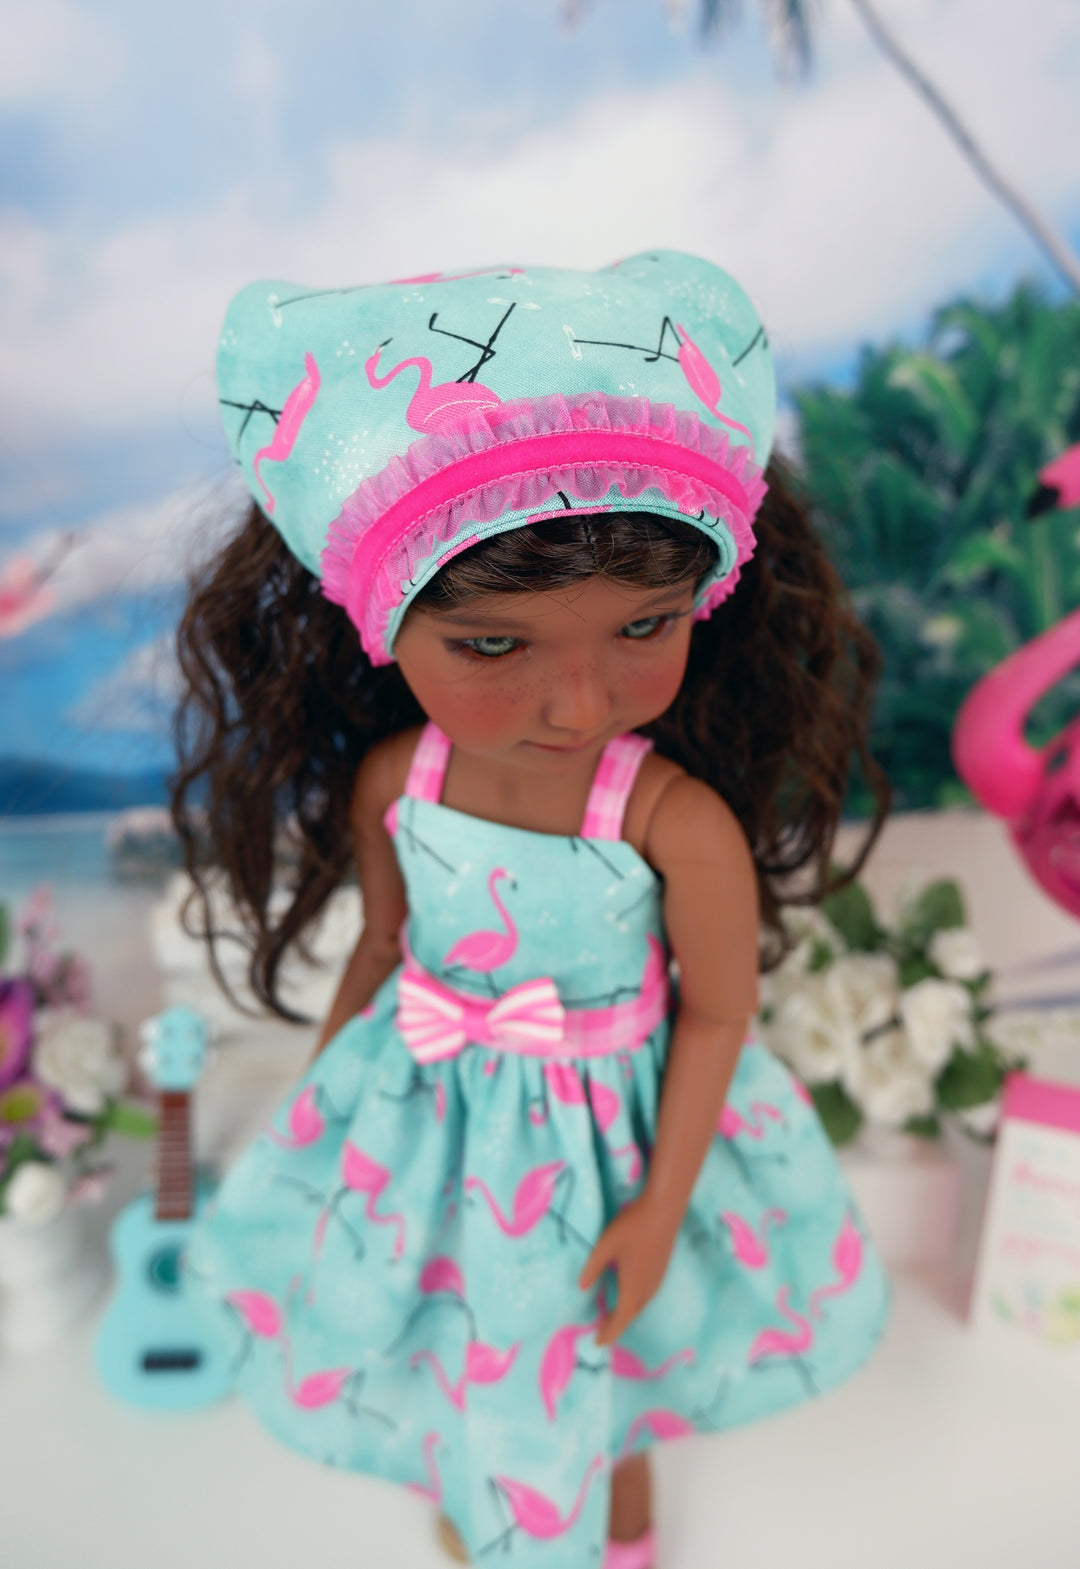 Summer Flamingo - dress with shoes for Ruby Red Fashion Friends doll